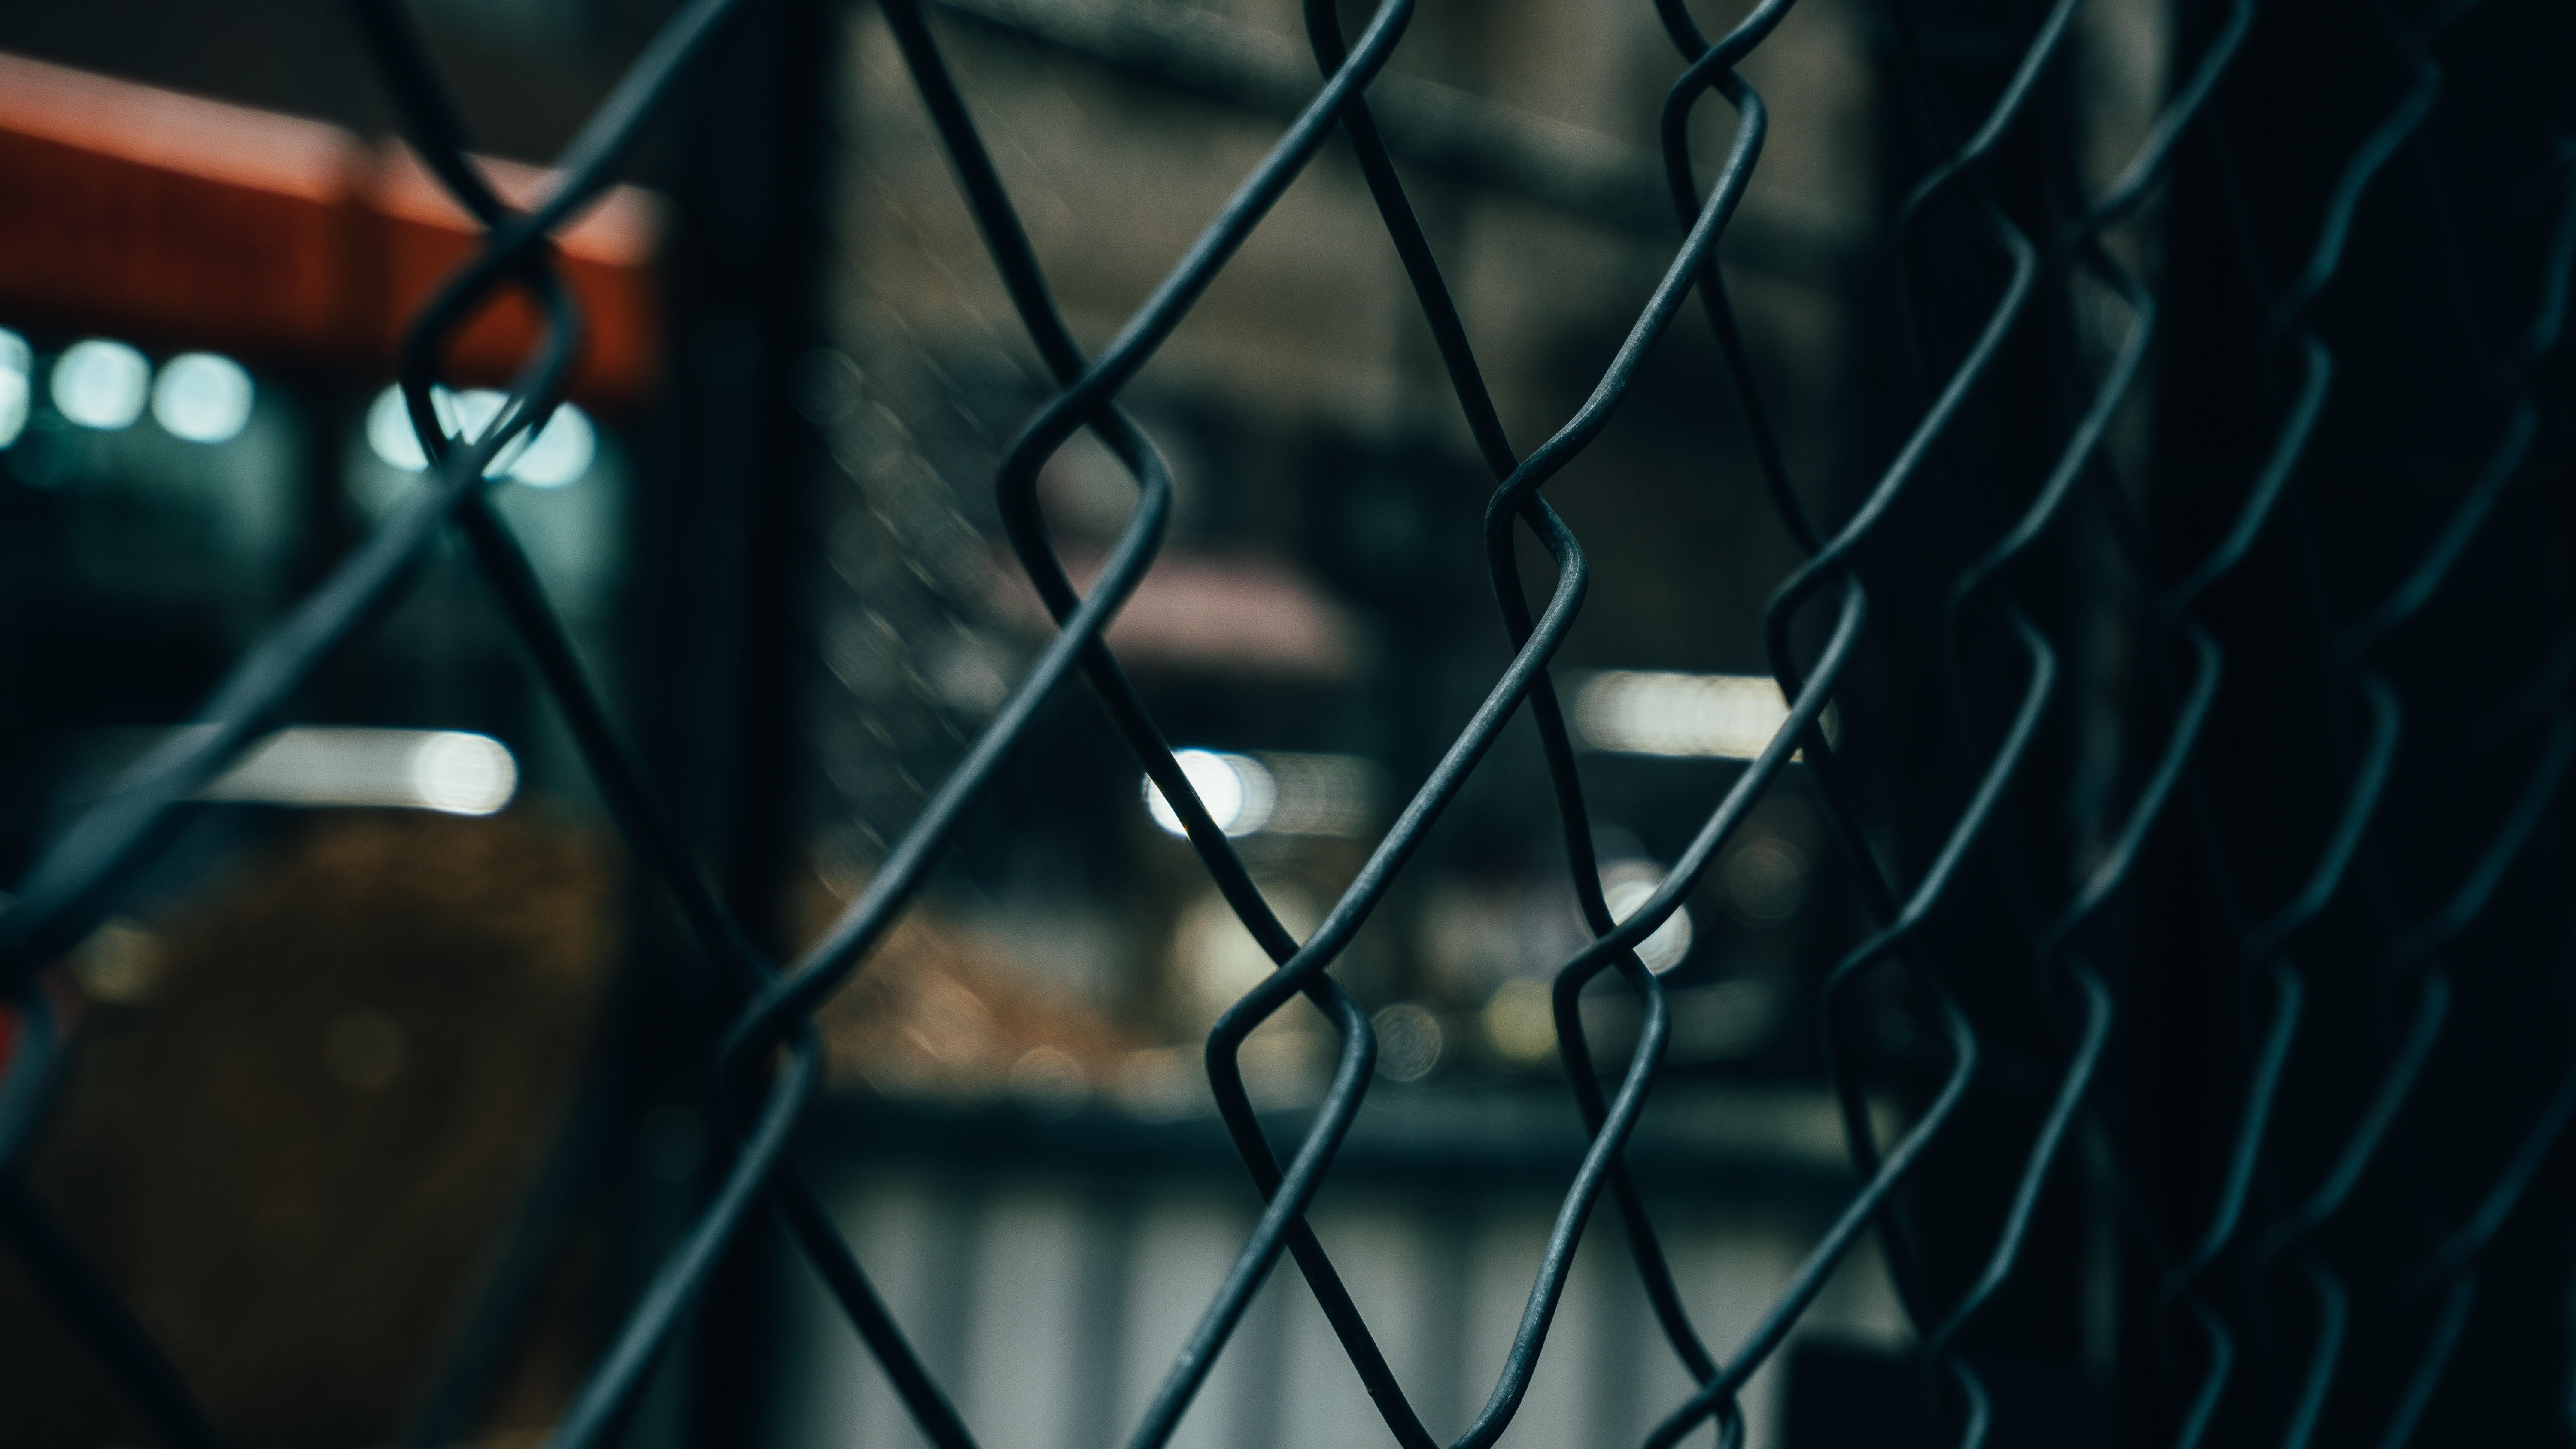 fence, miscellanea, miscellaneous, blur, smooth, metal grill, grille 1080p